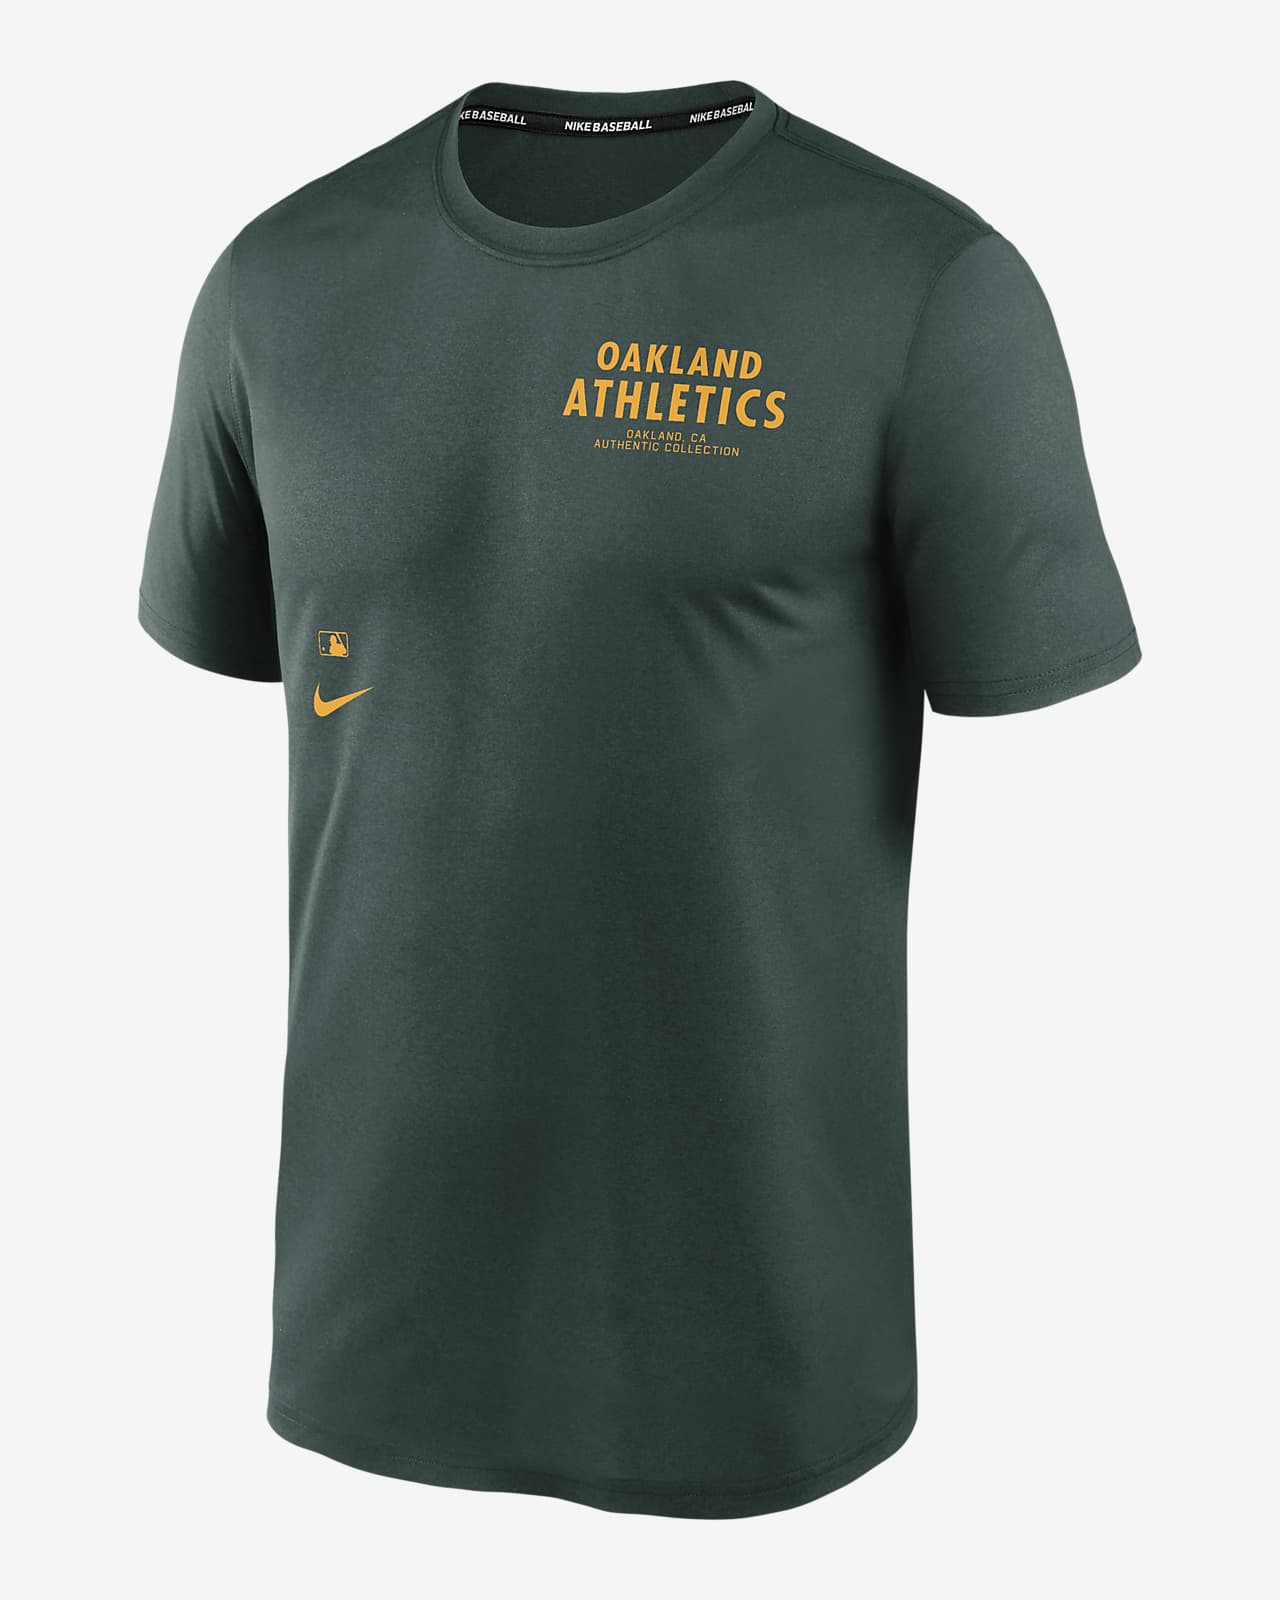 Oakland Athletics Authentic Collection Early Work Men’s Nike Dri-FIT MLB  T-Shirt